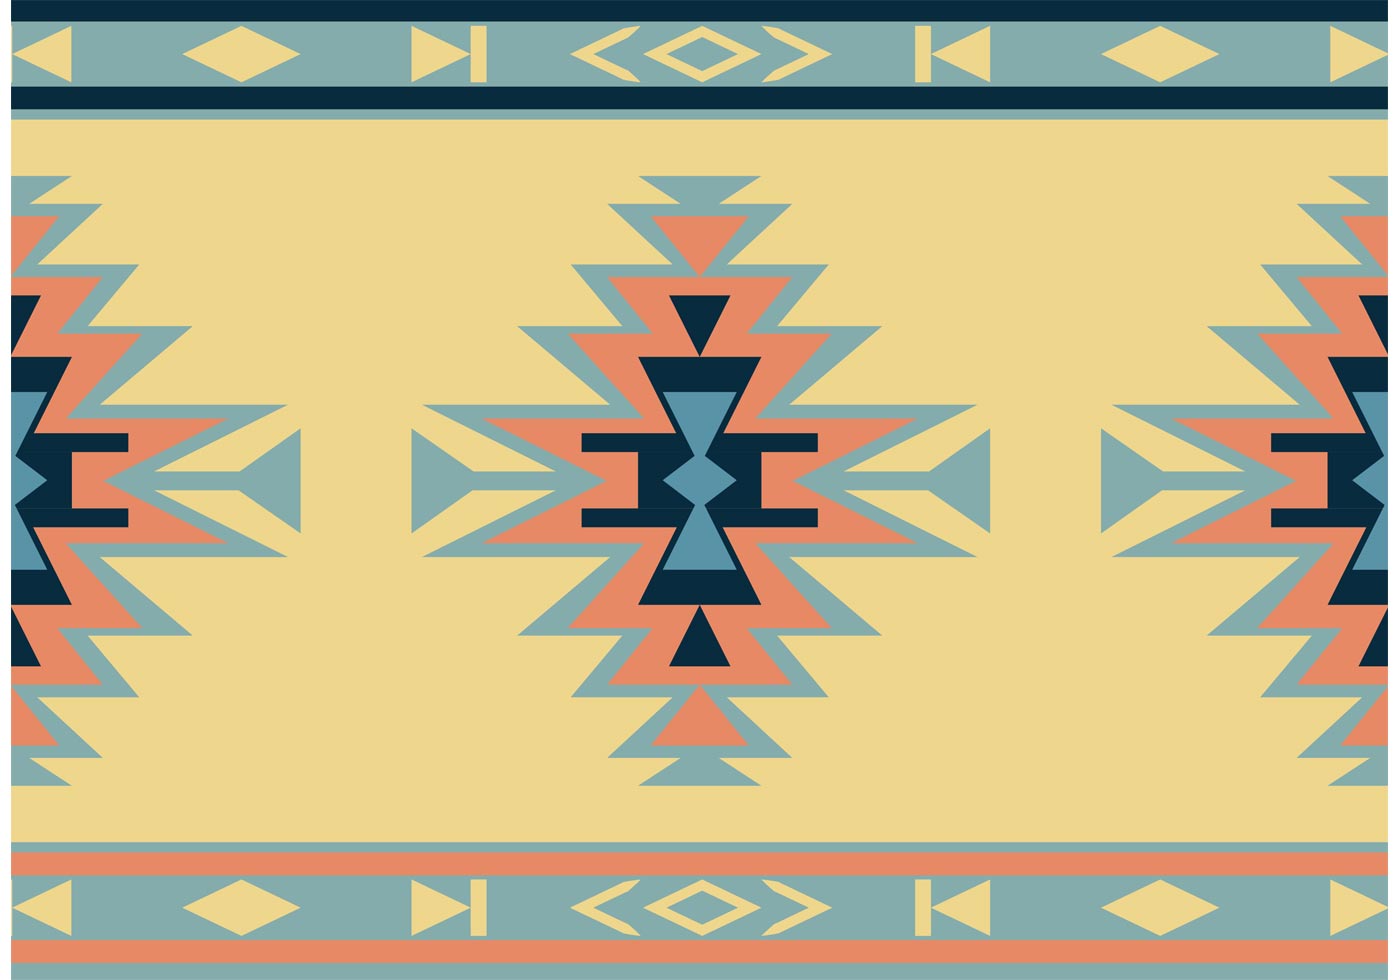 Native American Free Vector Art - (1941 Free Downloads) - ClipArt Best